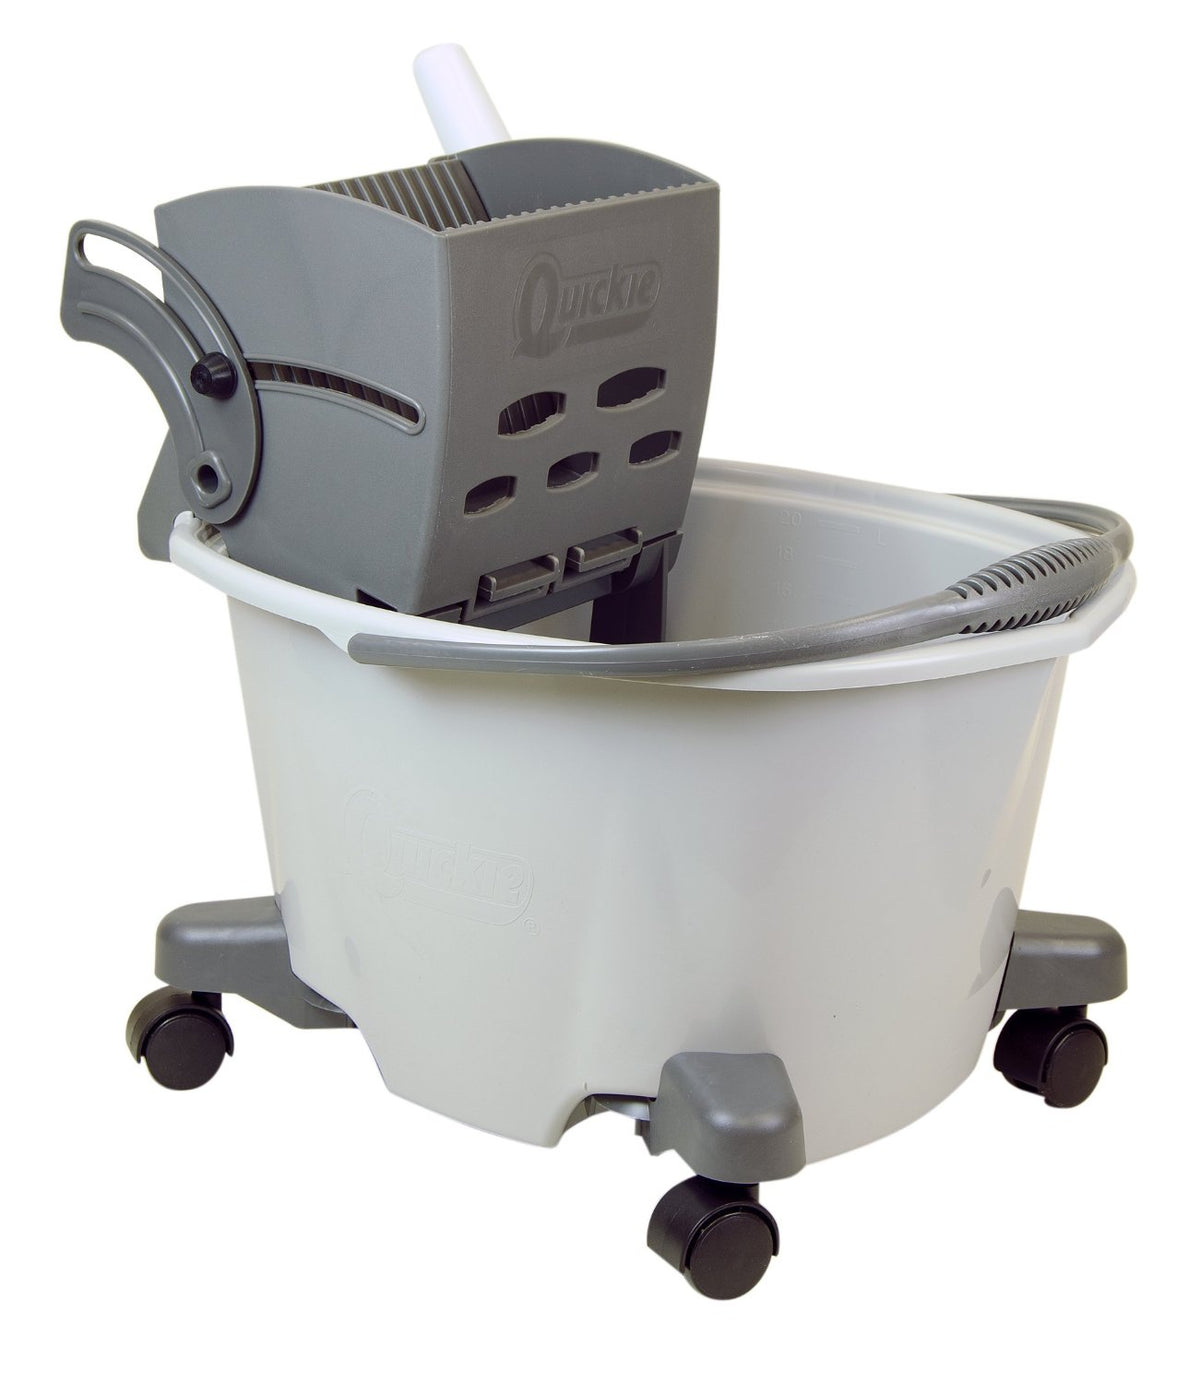 Quickie 20032 EZ-Glide Mop Bucket with Wringer, Plastic, 5 Gallon